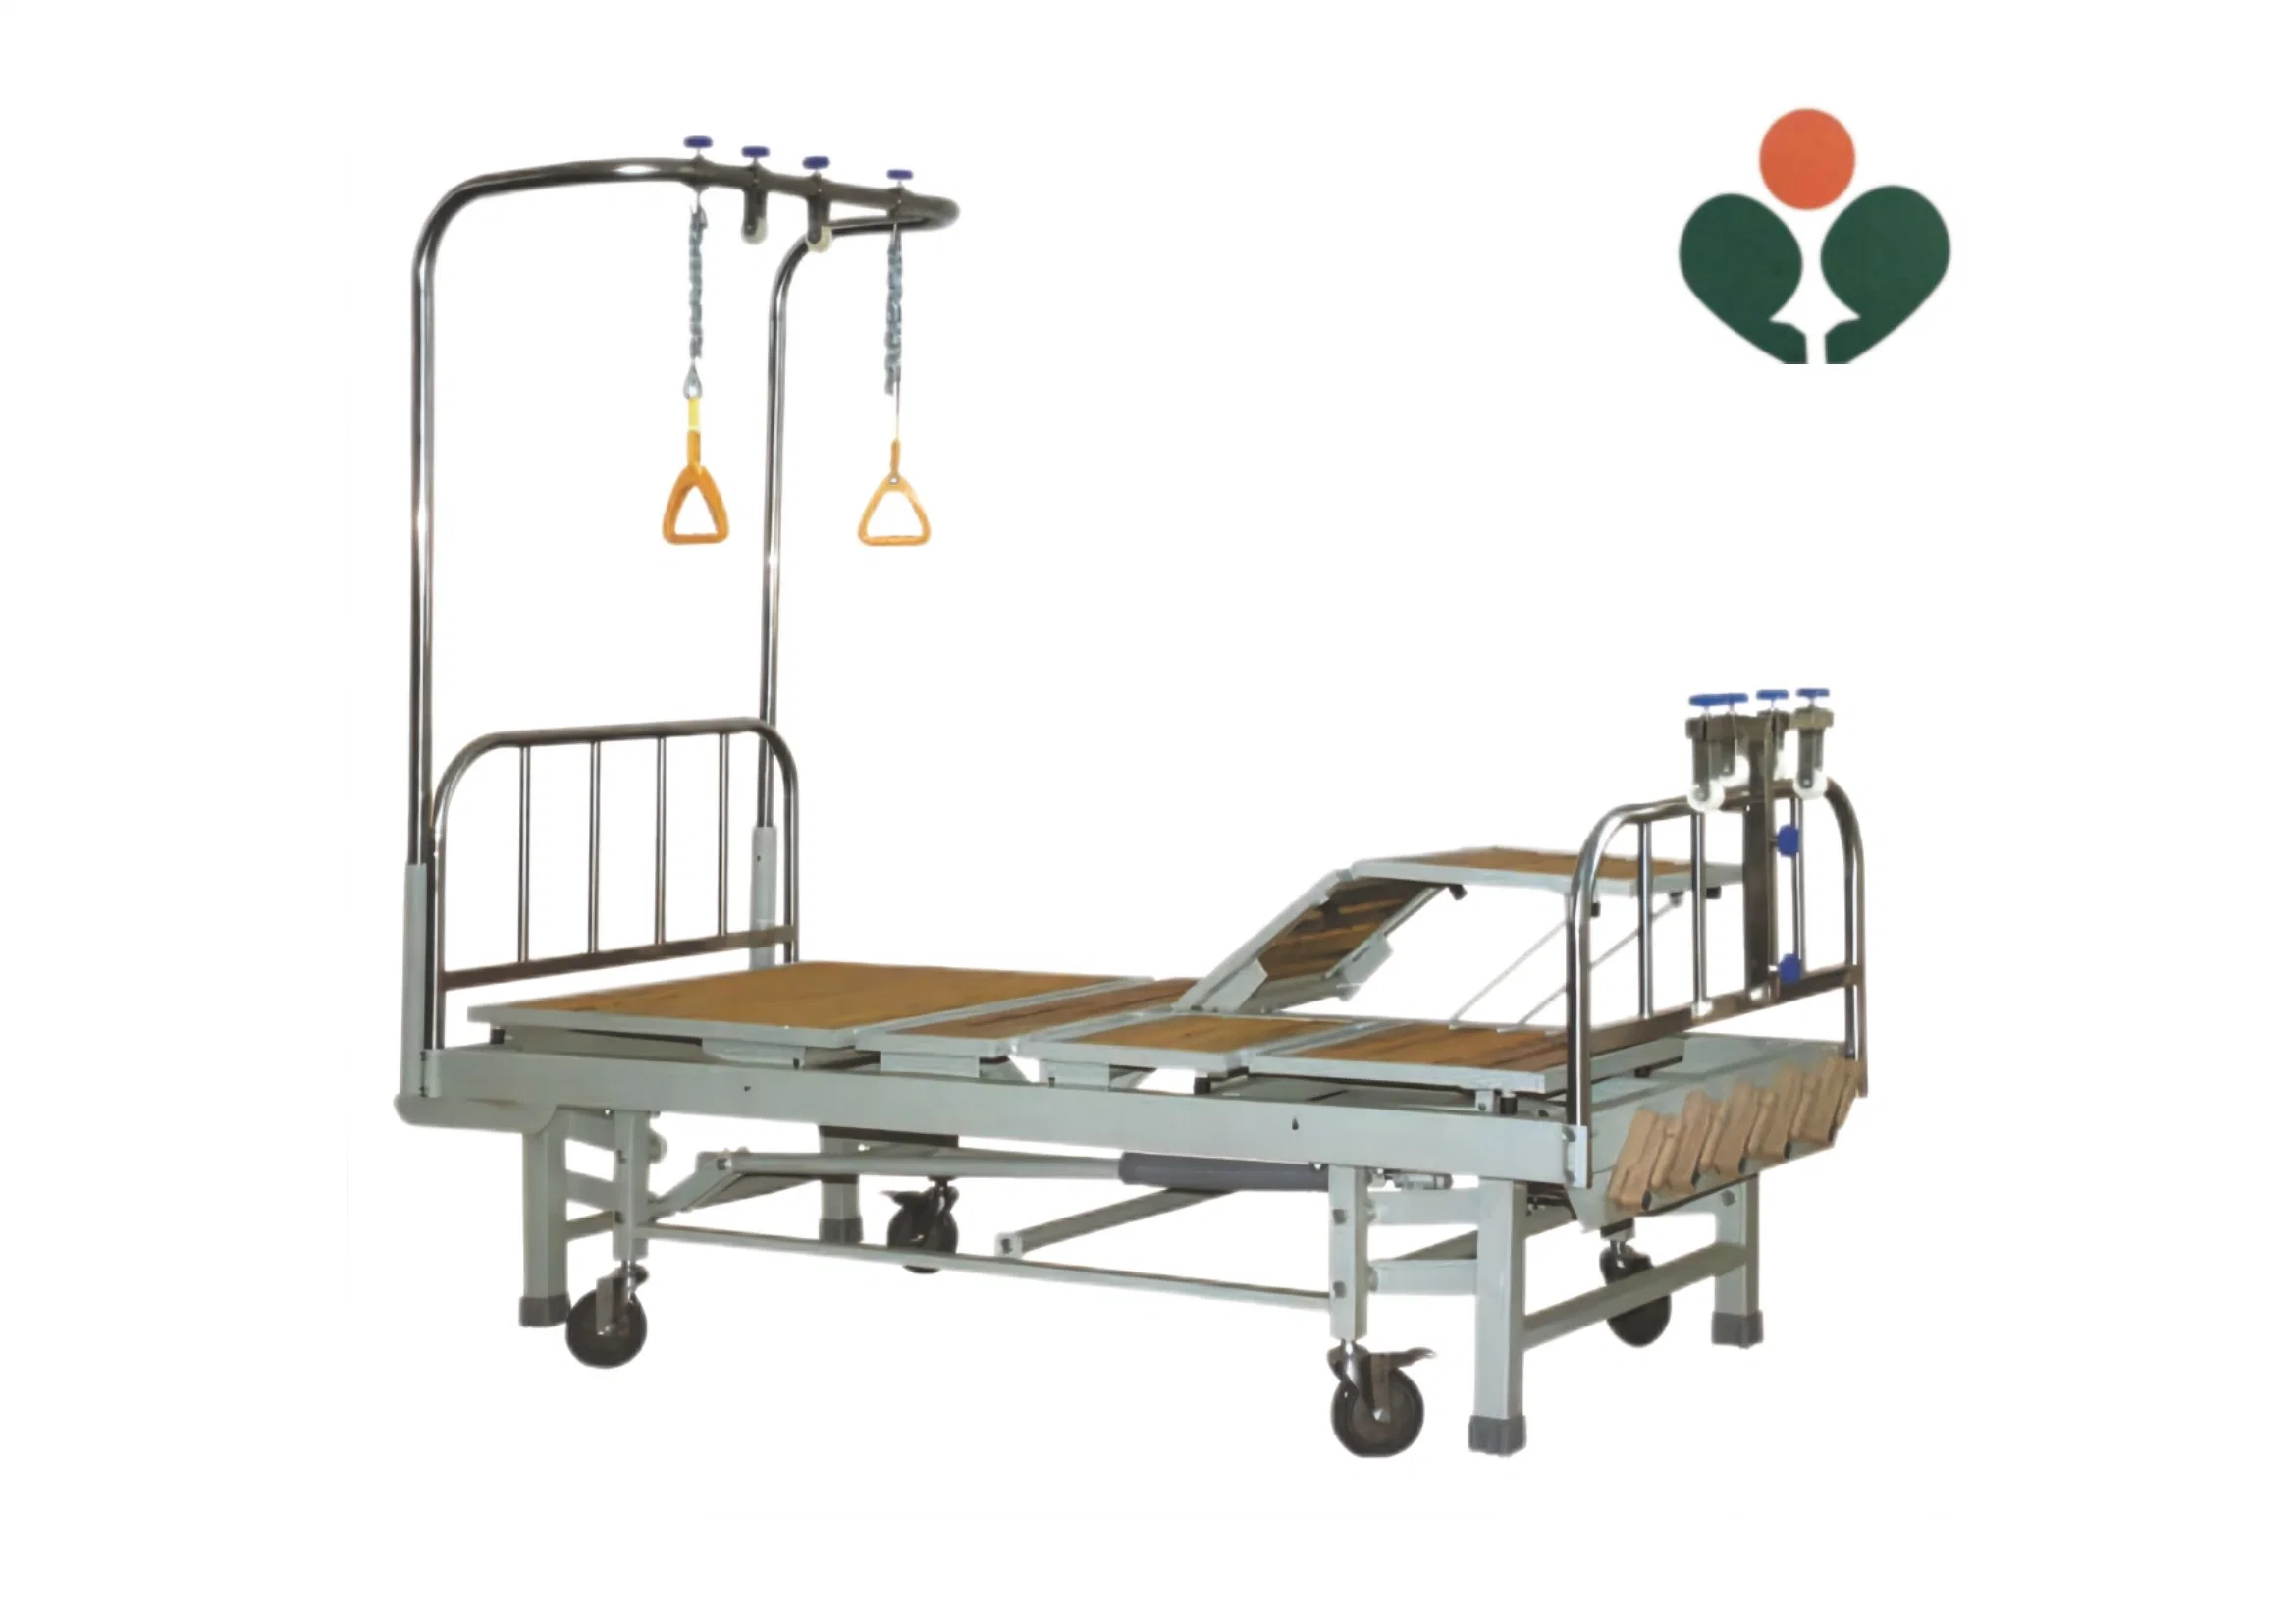 Five-Function Single-Arm Traction Orthopaedic Nursing Bed Health Care Appliance Medical Equipment